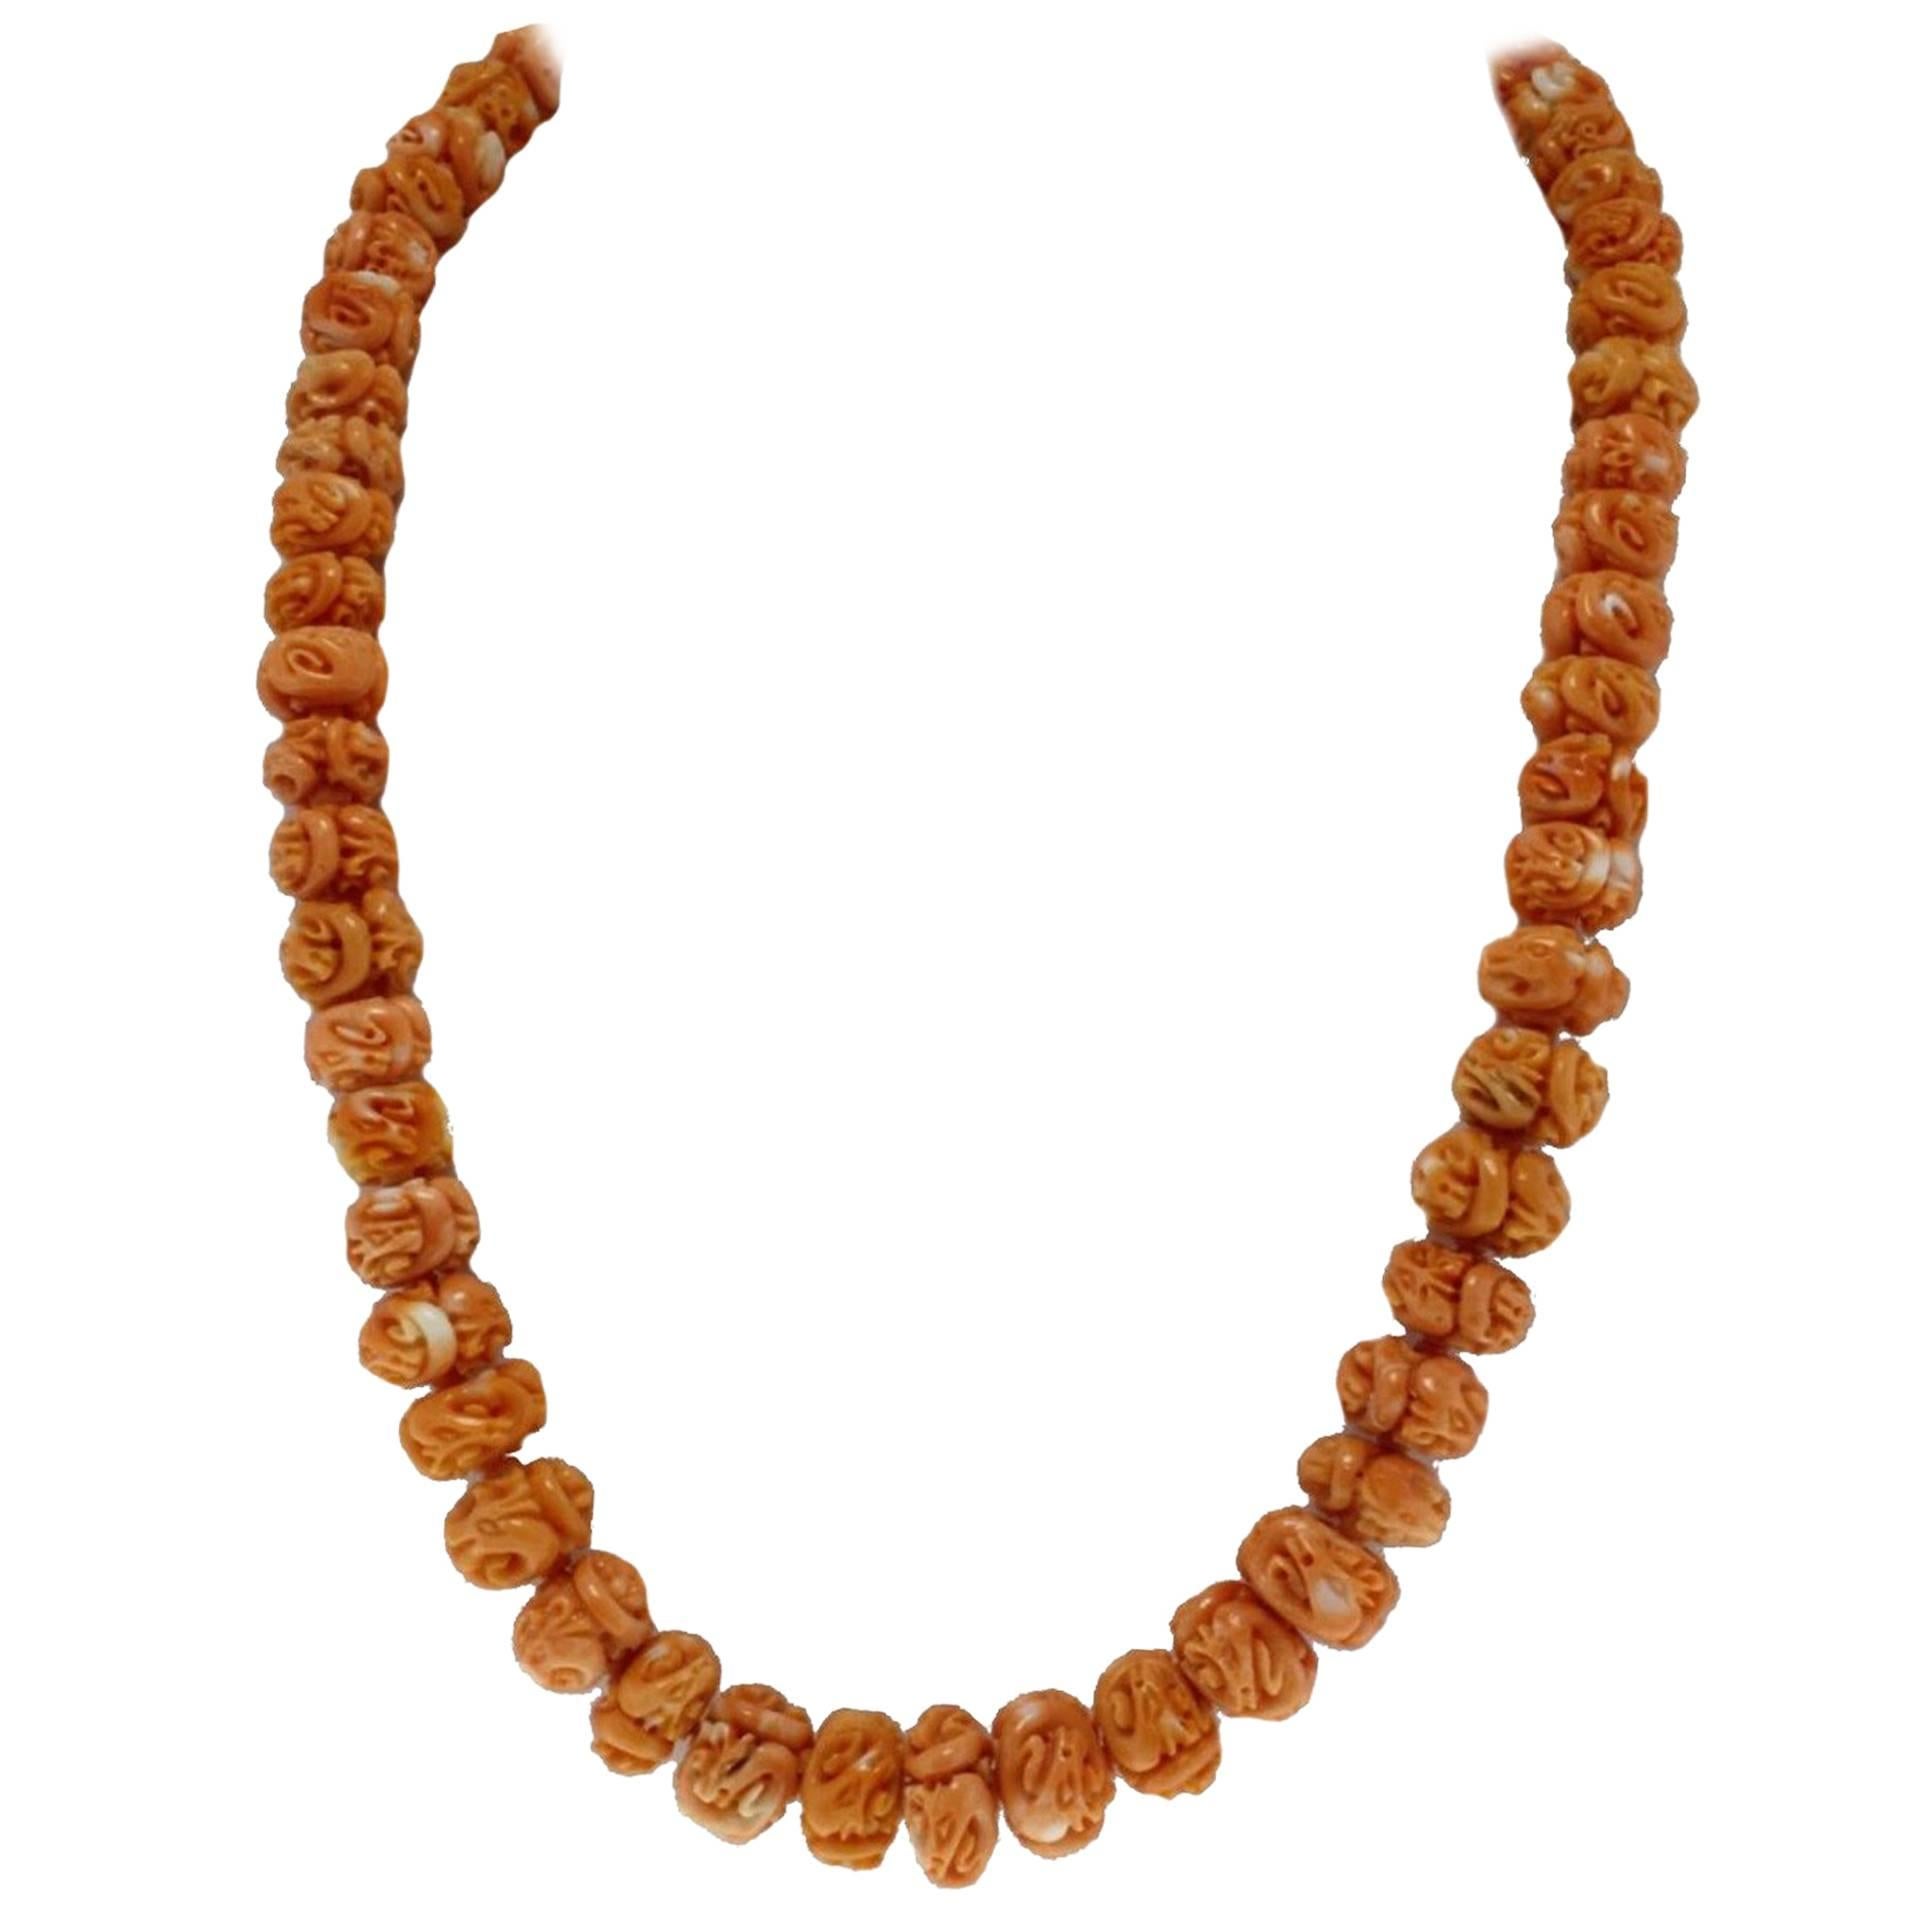 Engraved Orange Spheres Row Corals, 18K Yellow Gold Closure, Beaded Necklace